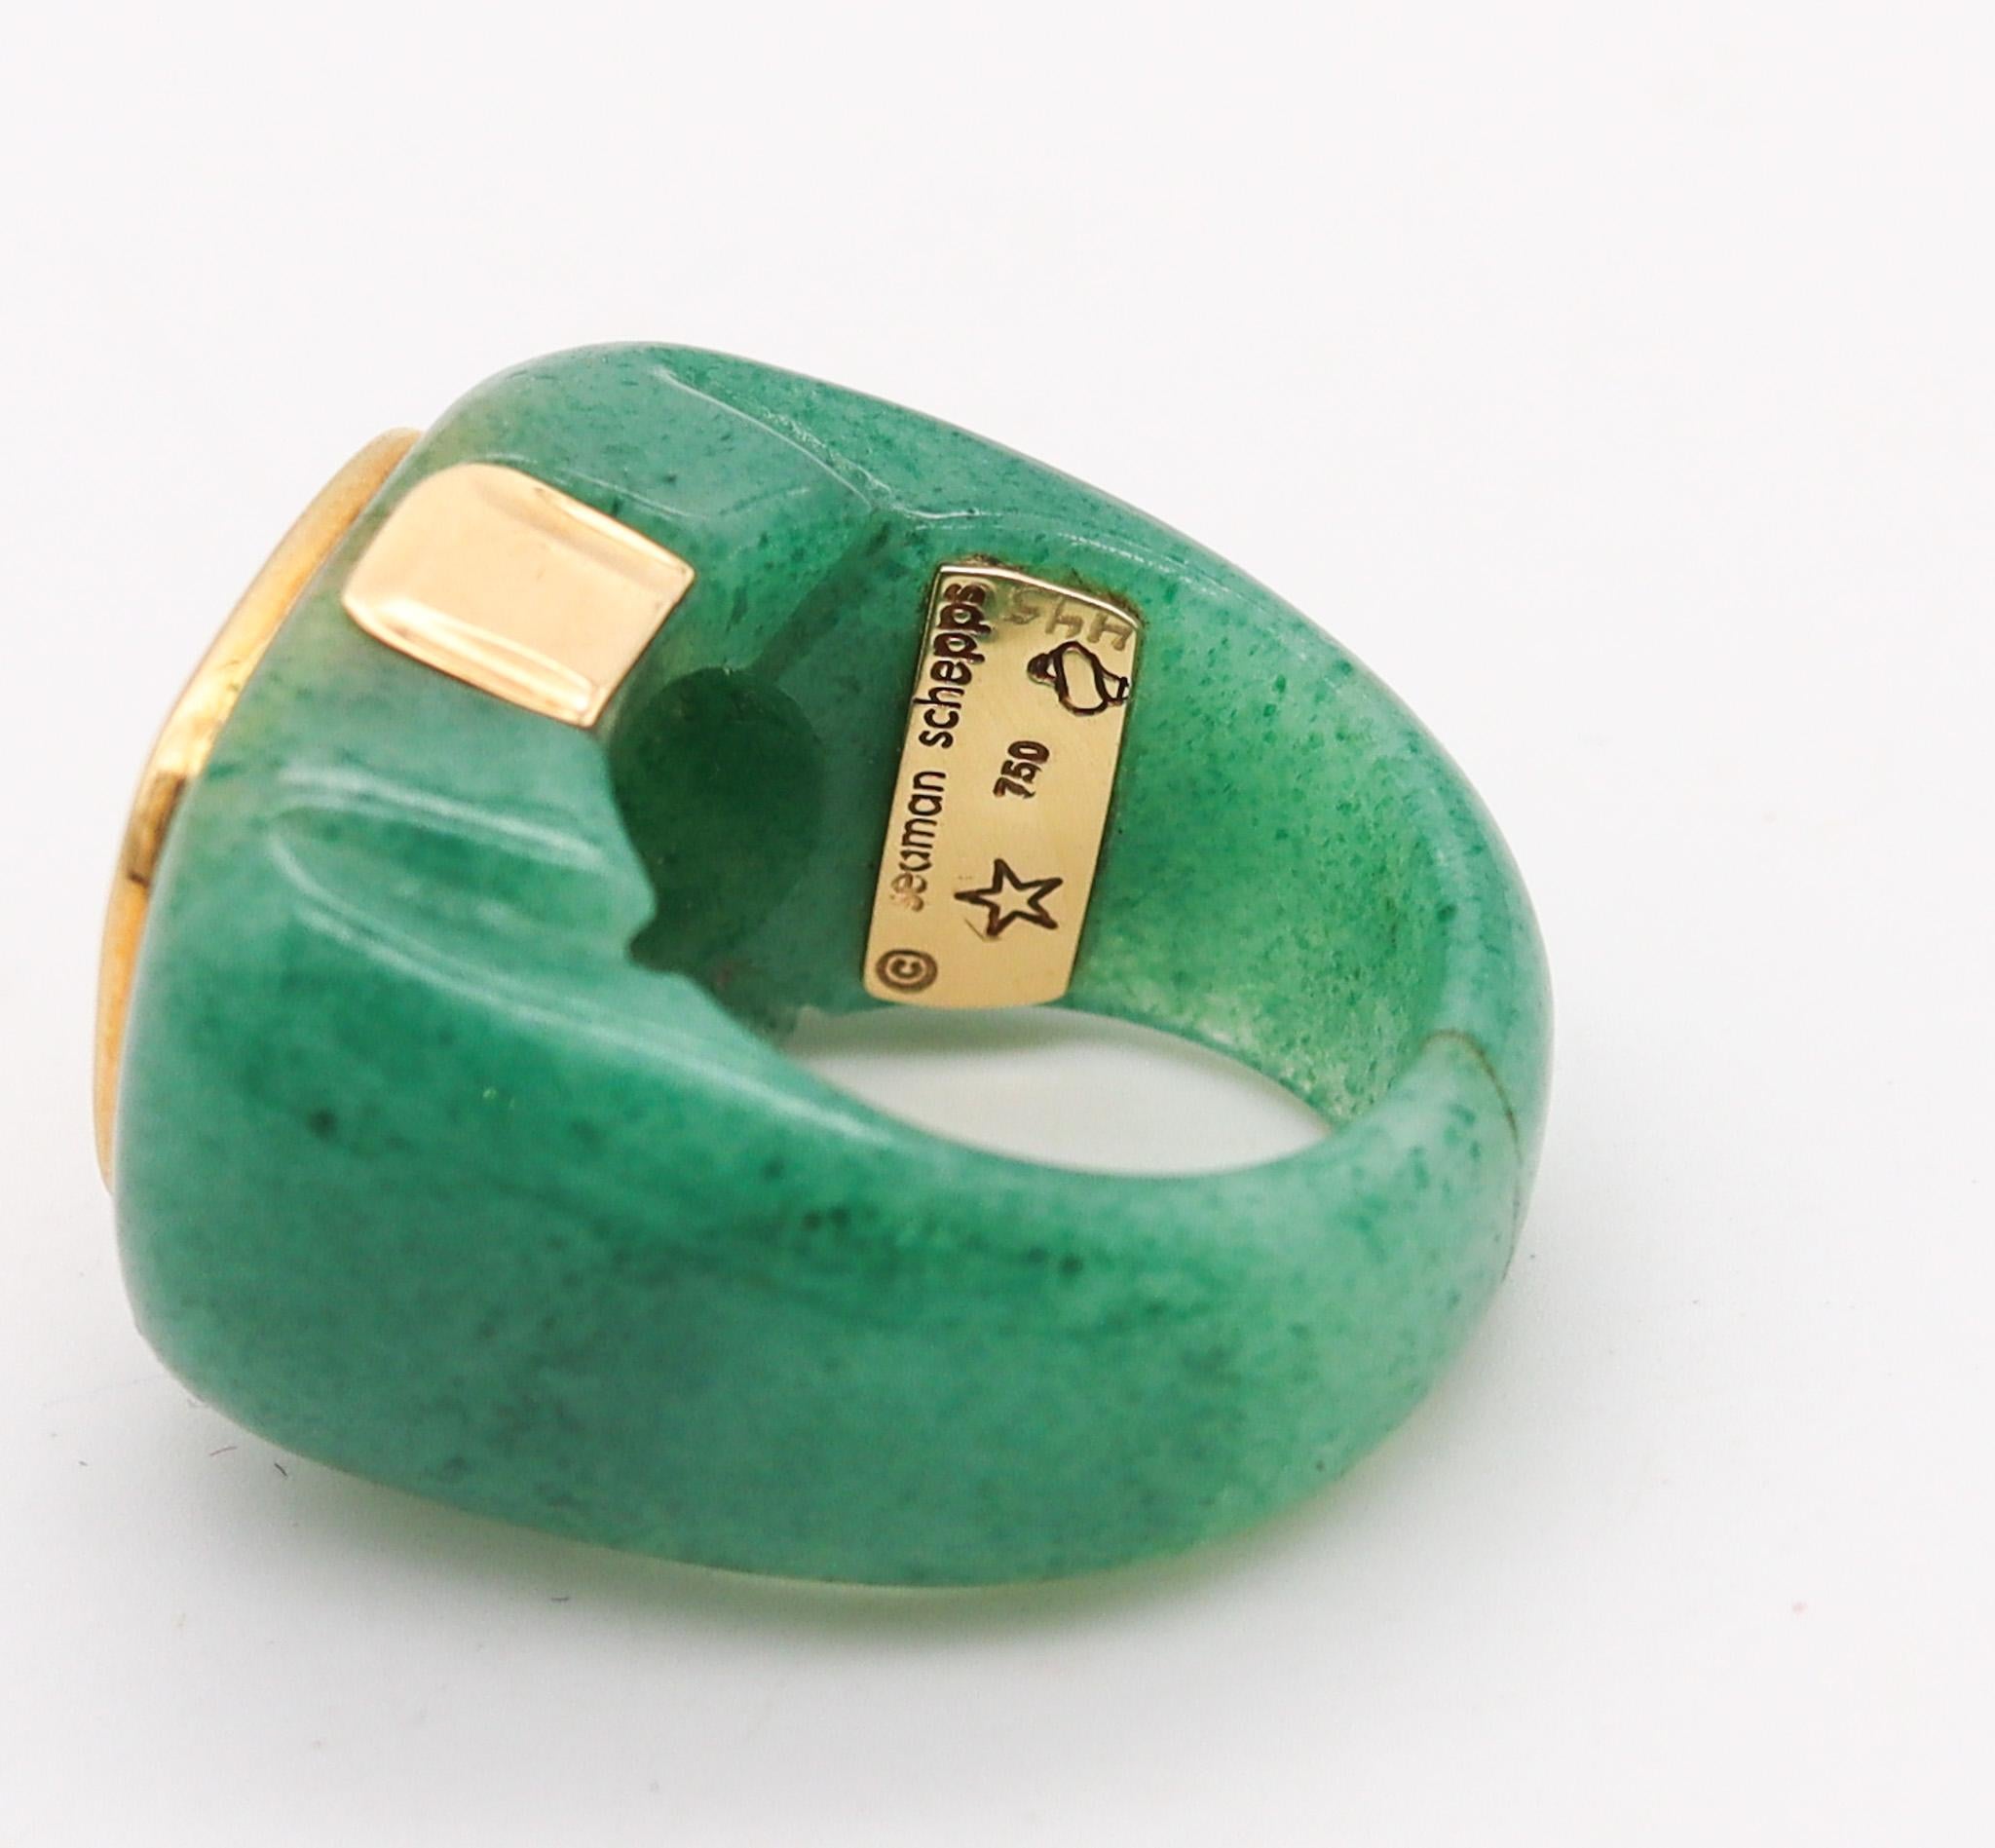 Cushion Cut Seaman Schepps Carved Aventurine Cocktail Ring In 18Kt Yellow Gold With Citrine For Sale